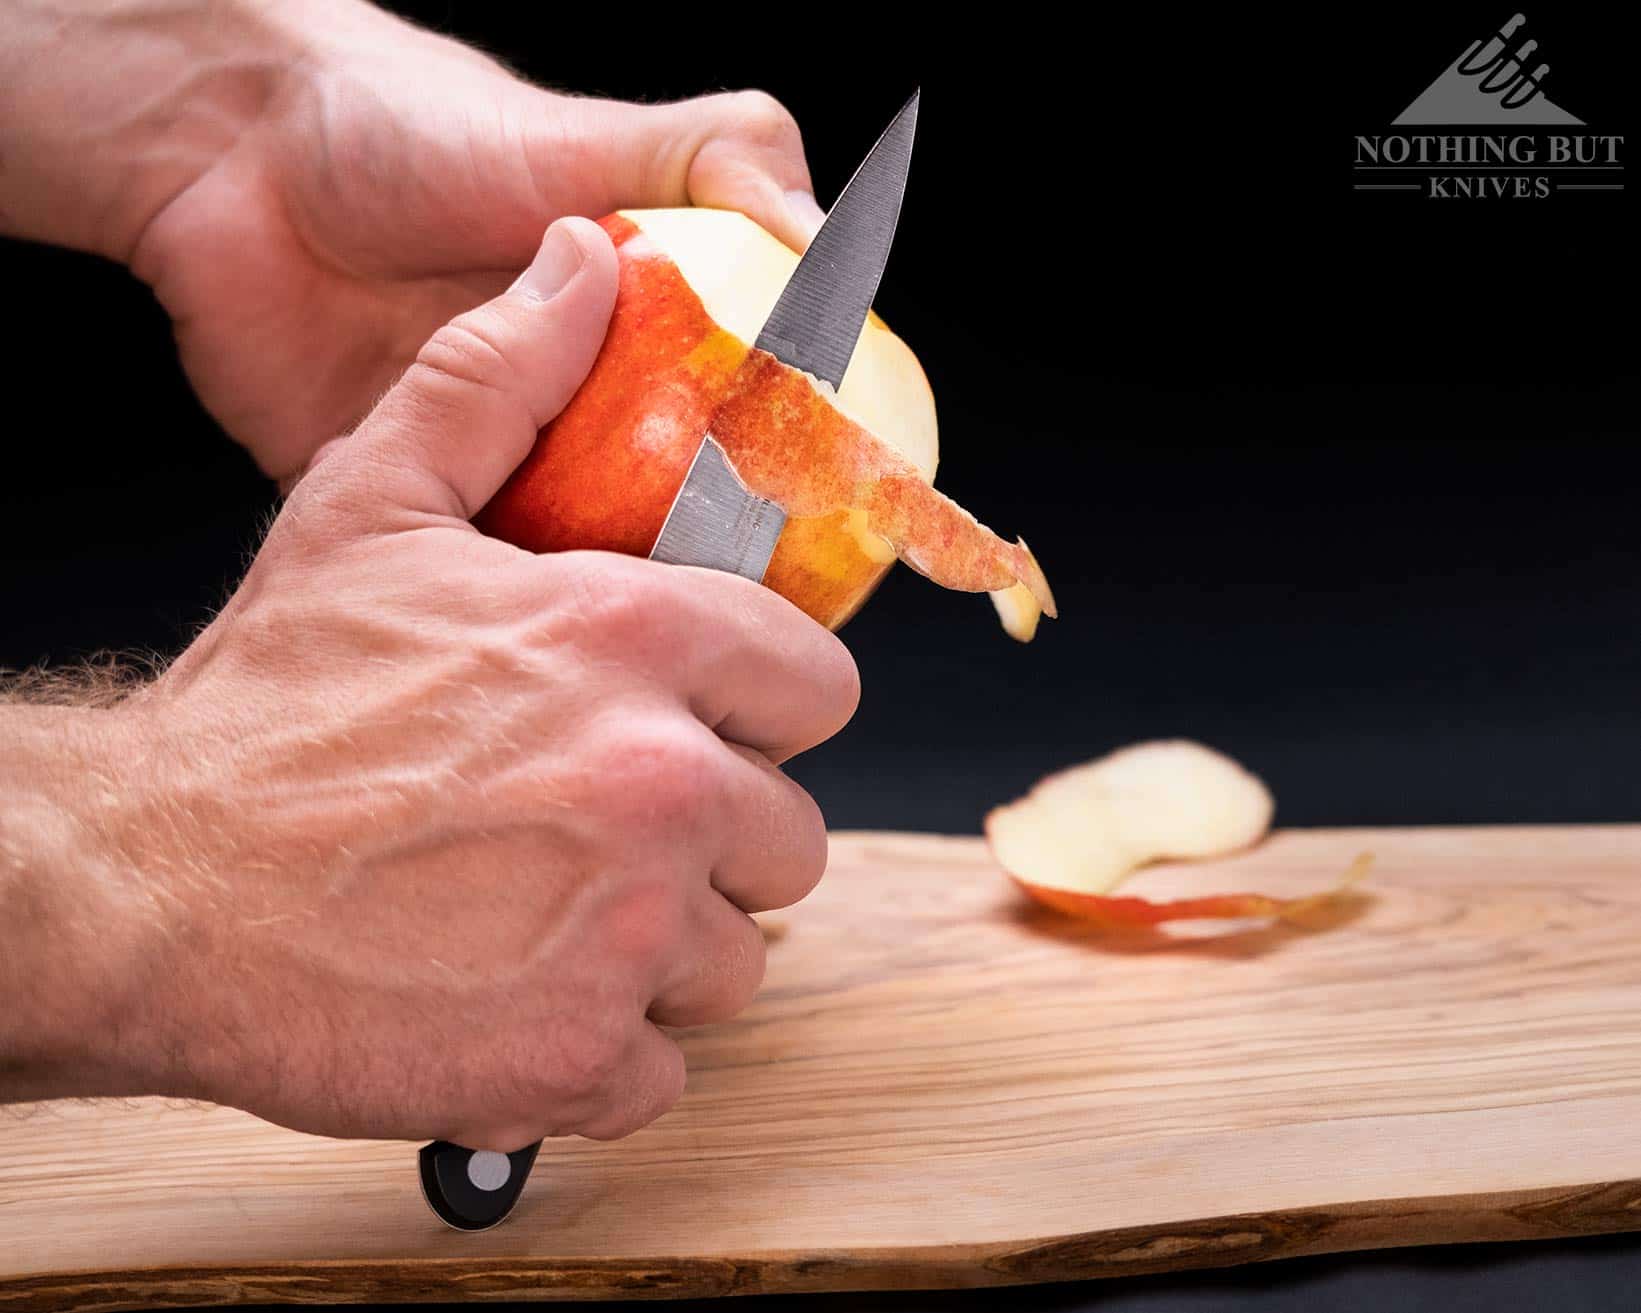 The Zwilling Professional S 4 inch paring knife peeling an apple in front of a dark background.